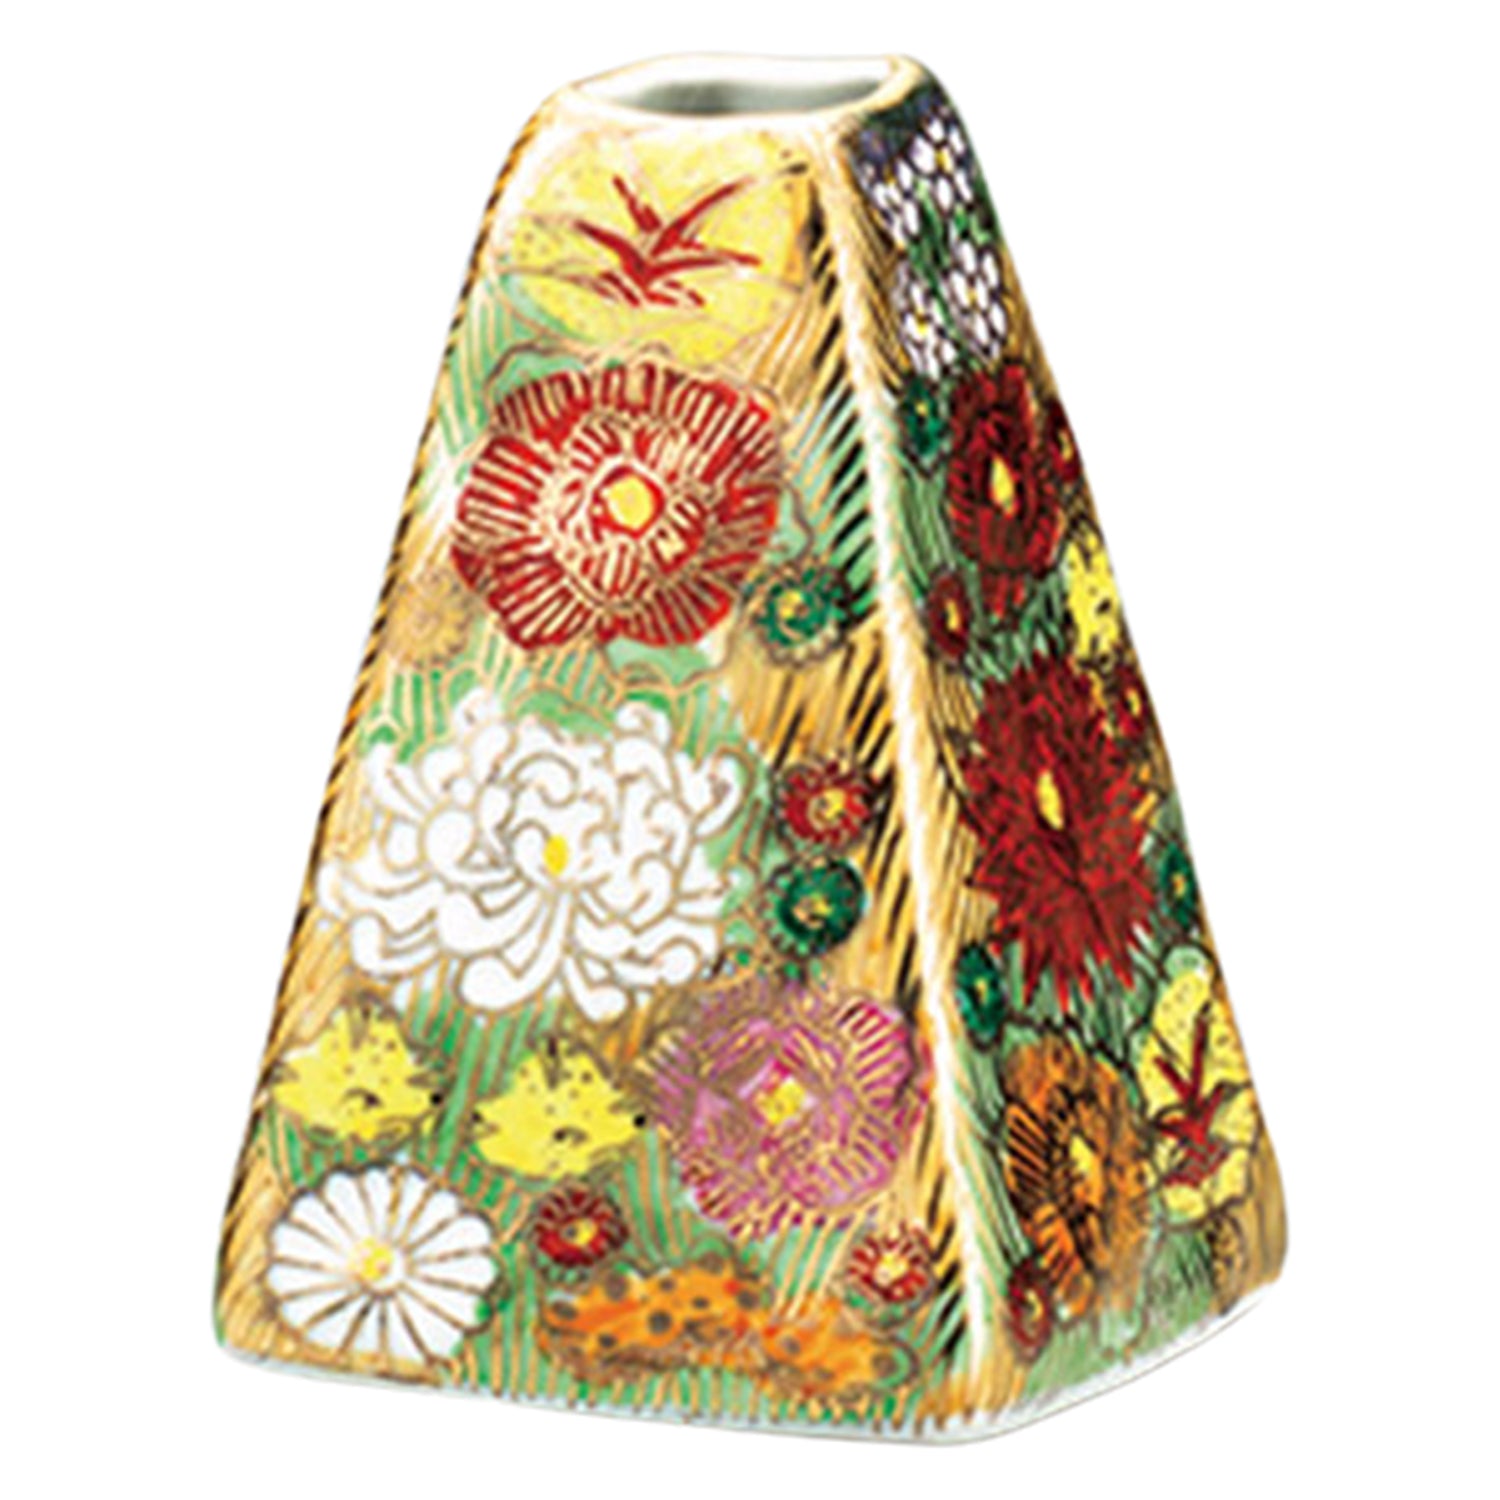 Tokoname ware Flower Vase  Import Japanese products at wholesale prices -  SUPER DELIVERY